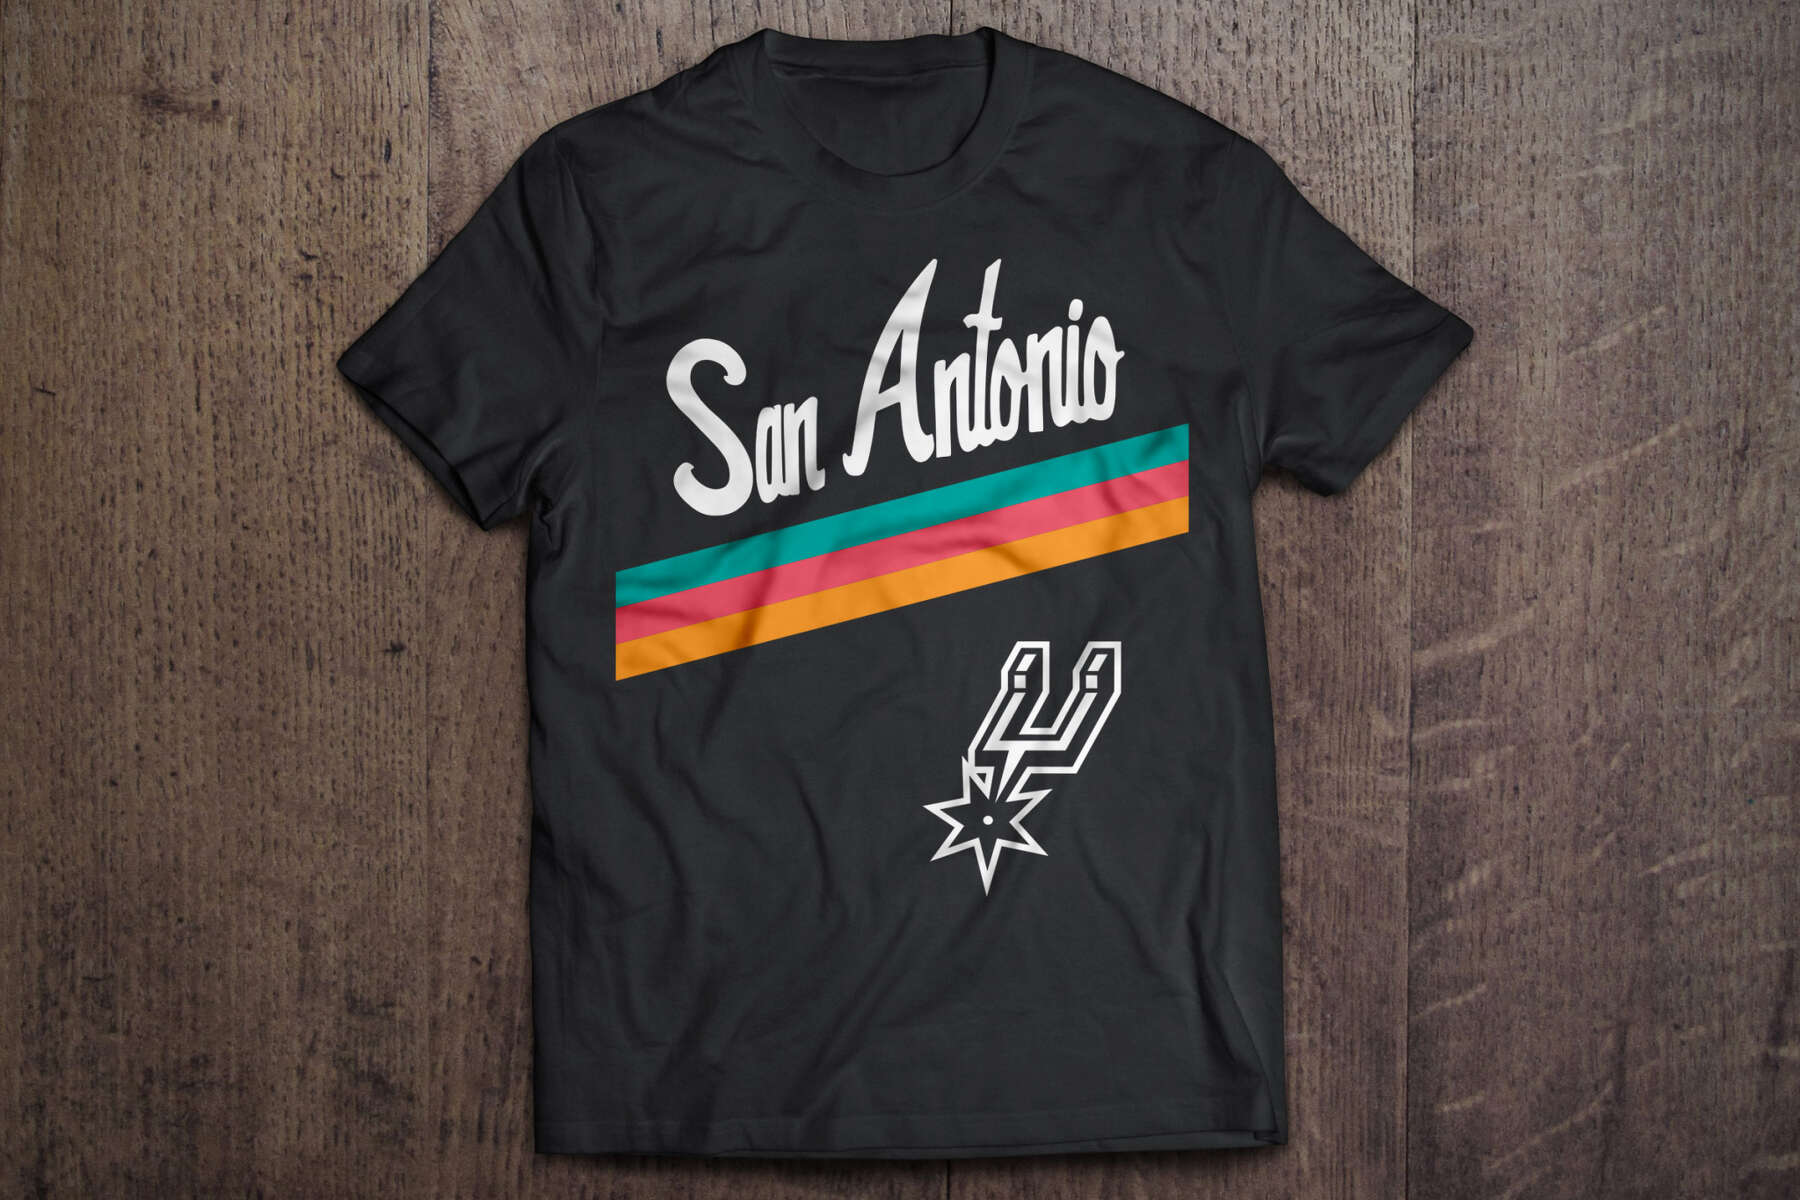 Spurs fans will get a free, 'retro' t-shirt with Fiesta-like colors at next